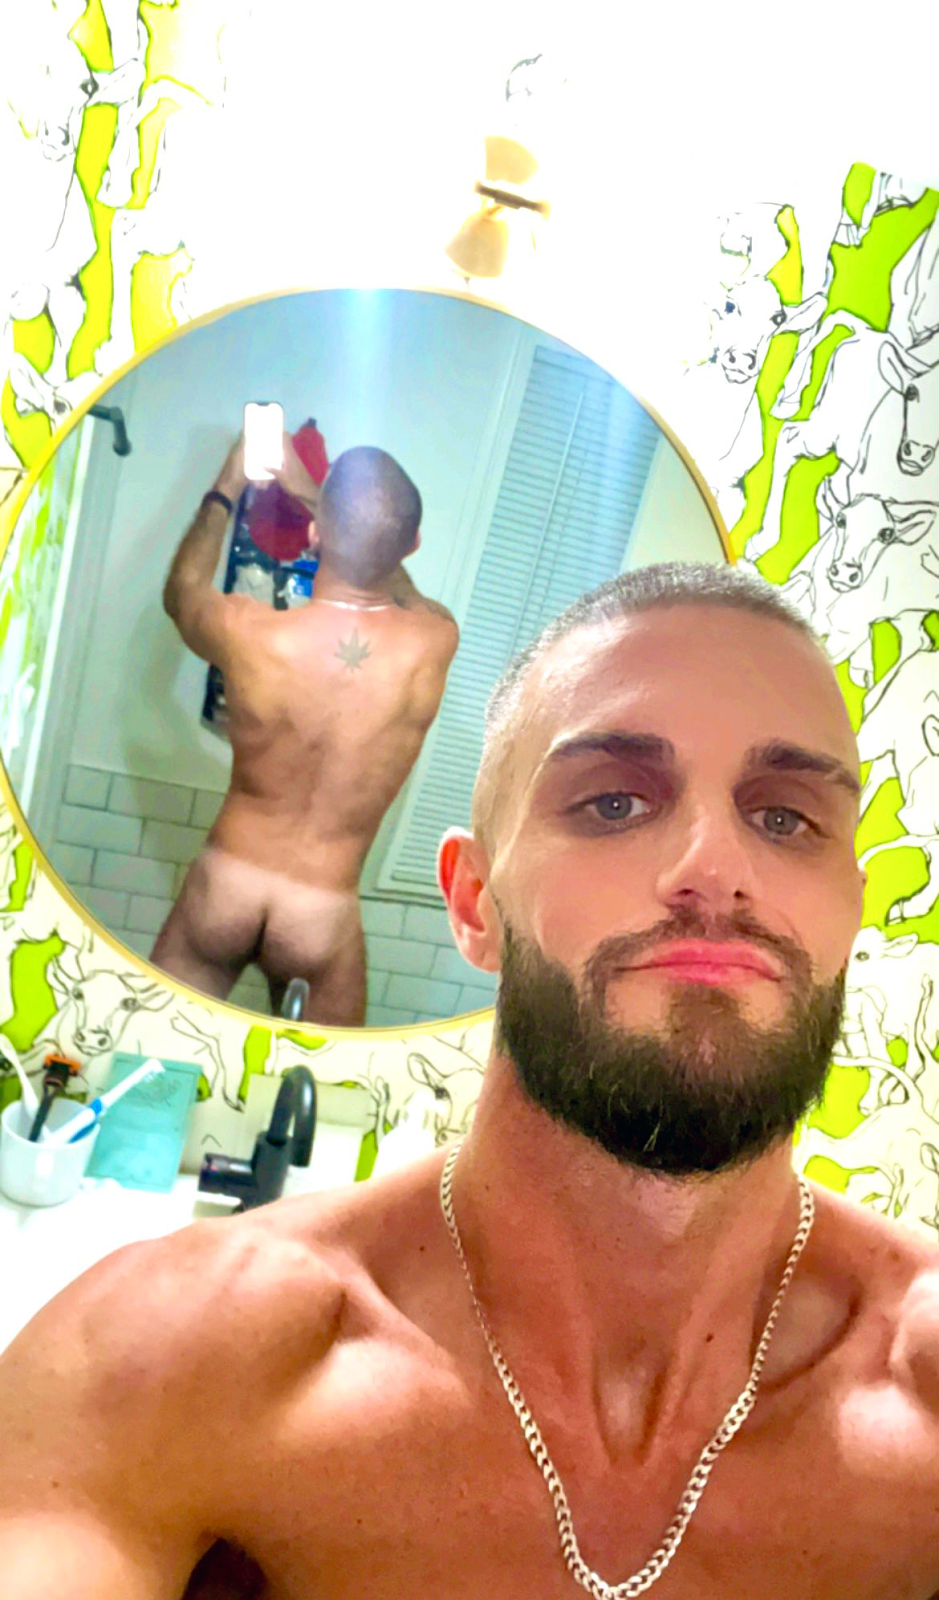 Tony Salas taking an iphone mirror selfie naked showing off his hairy ass tan lines